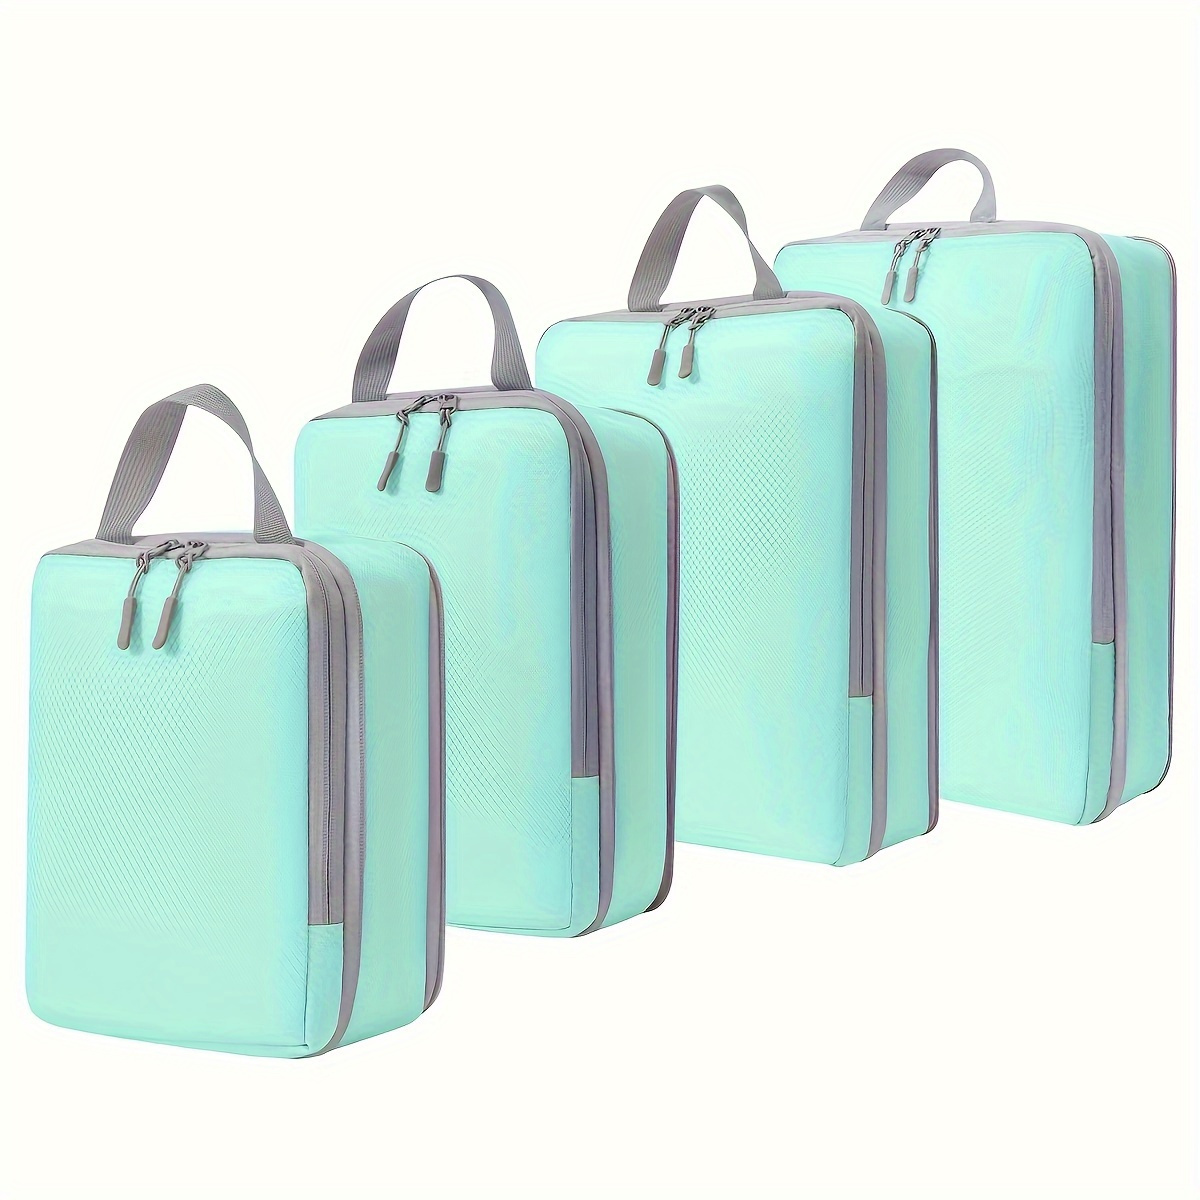 

4-piece Travel Packing Cube Set, Polyester Lightweight Luggage Organizers, Multi-sized Compressible Bags